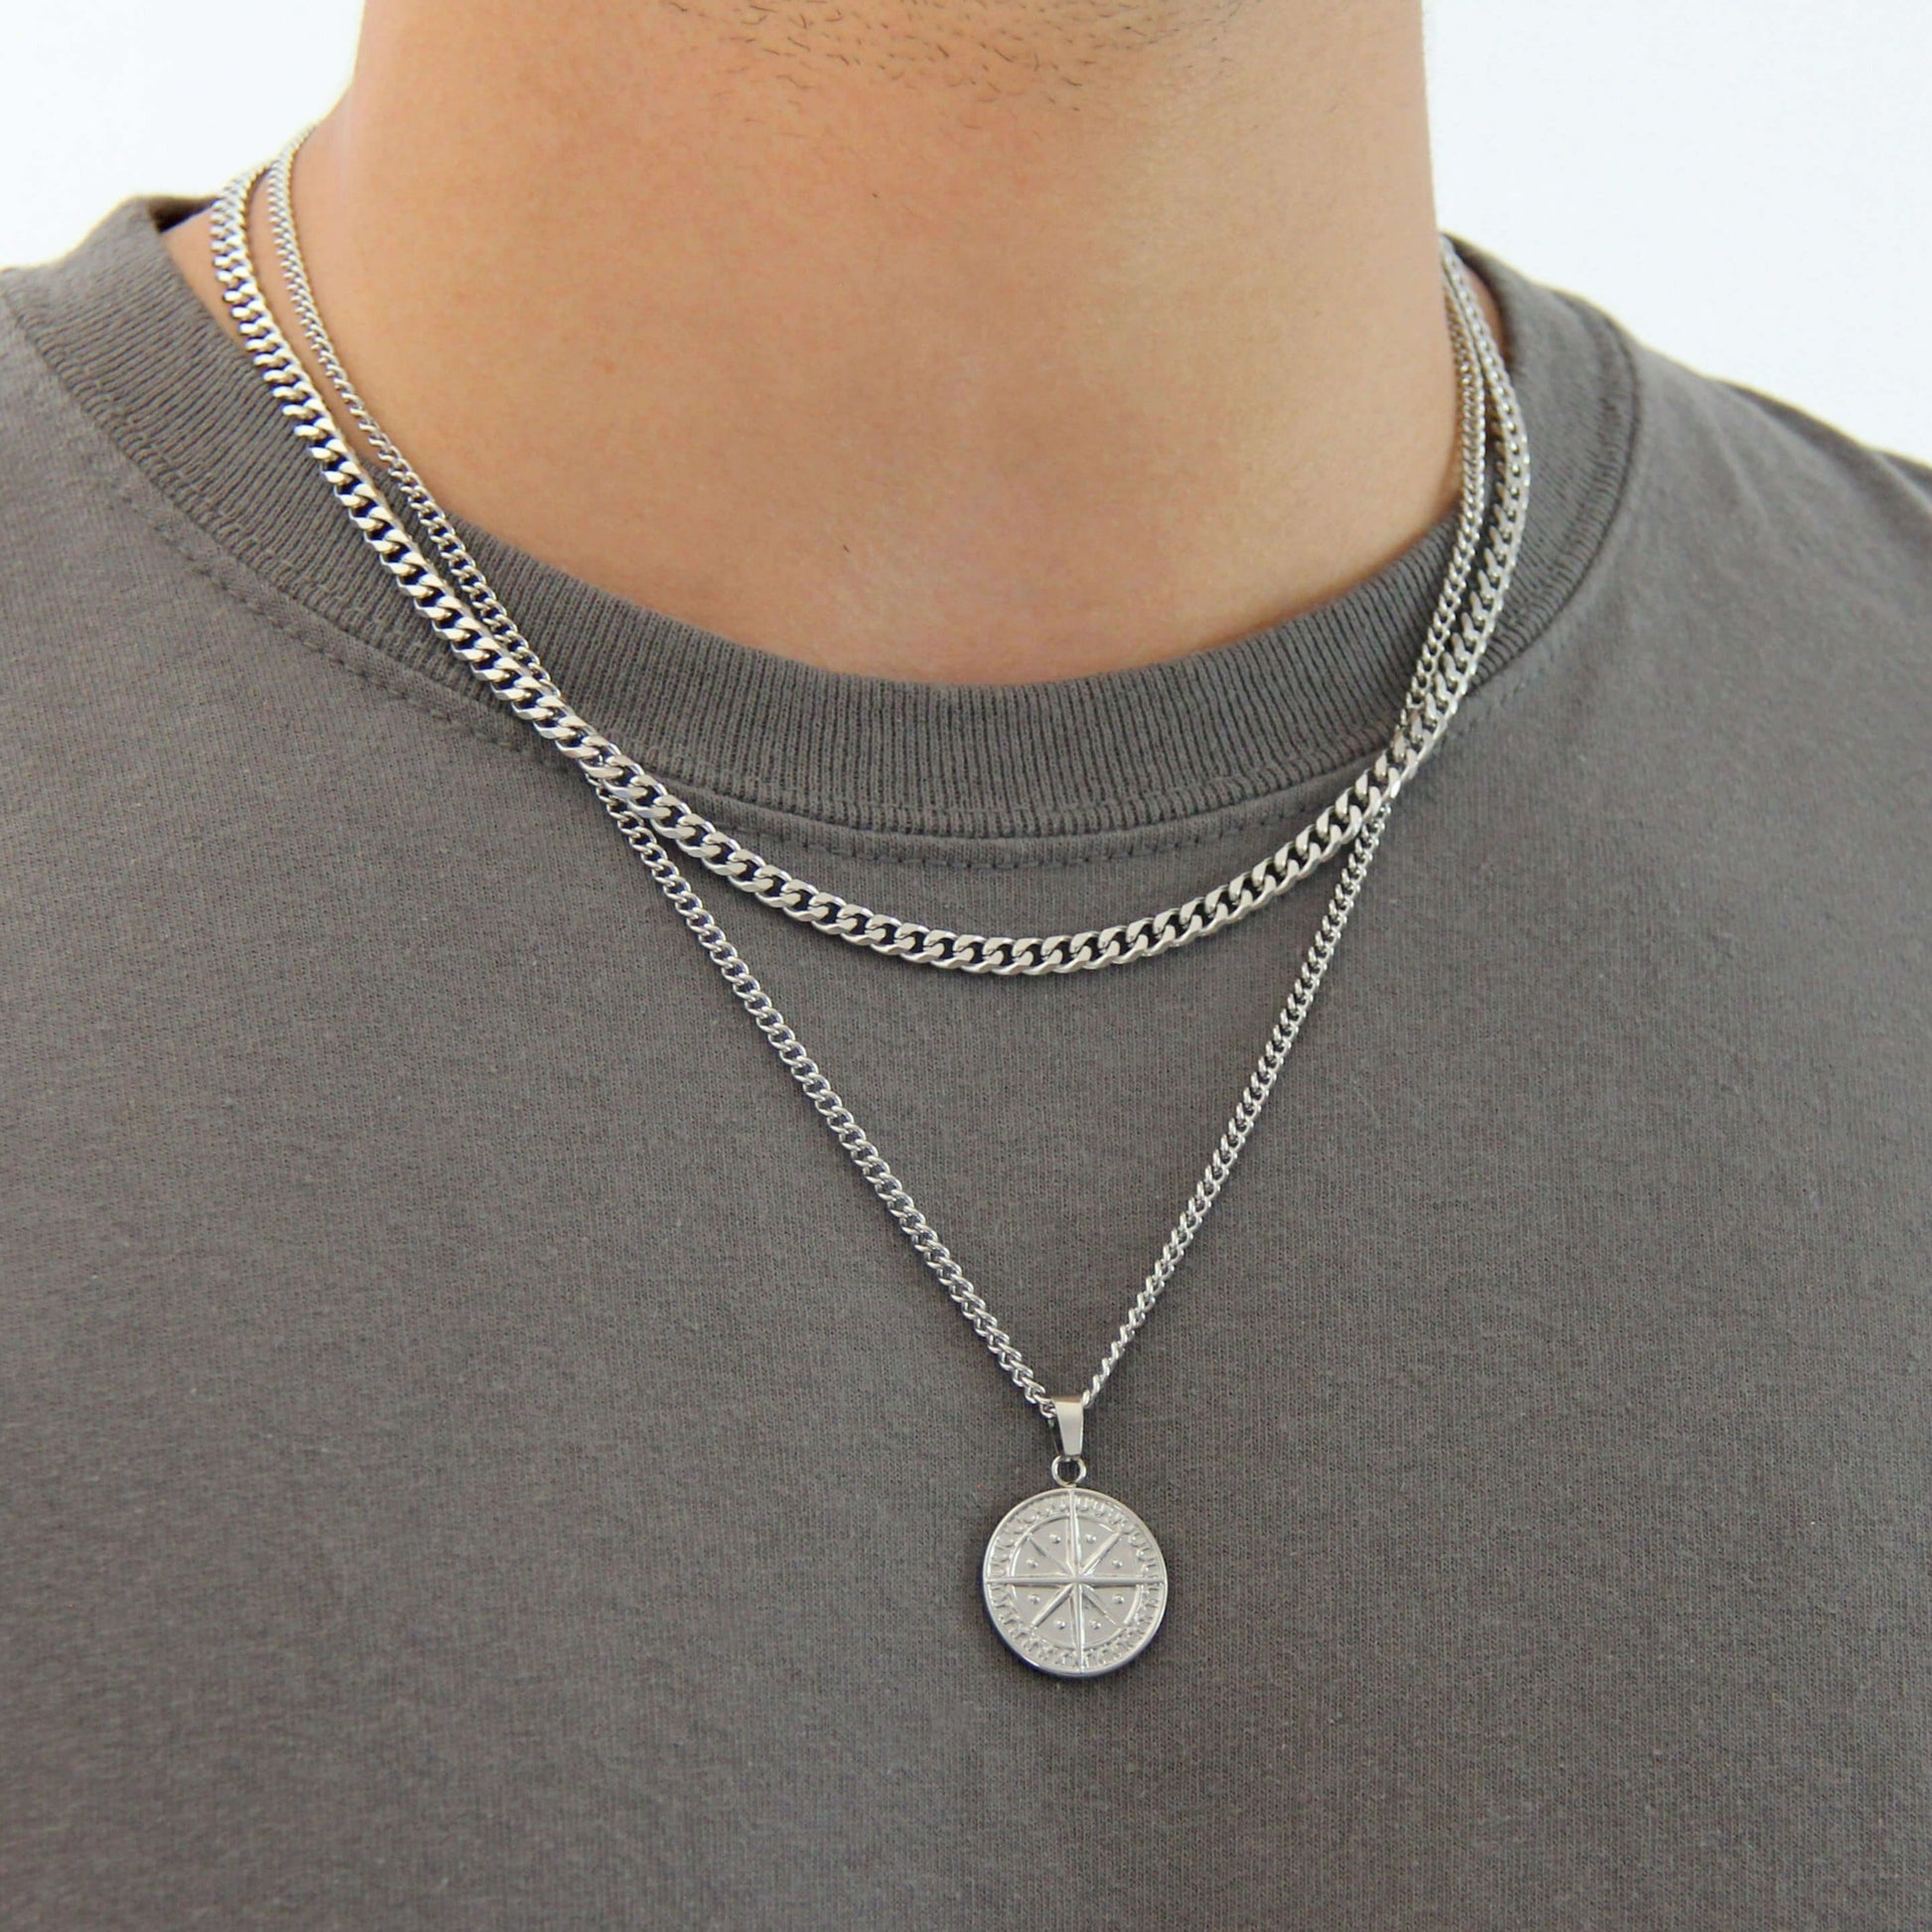 Silver Necklace Set For Men : 6mm Curb Chain and Lock Pendant Necklace